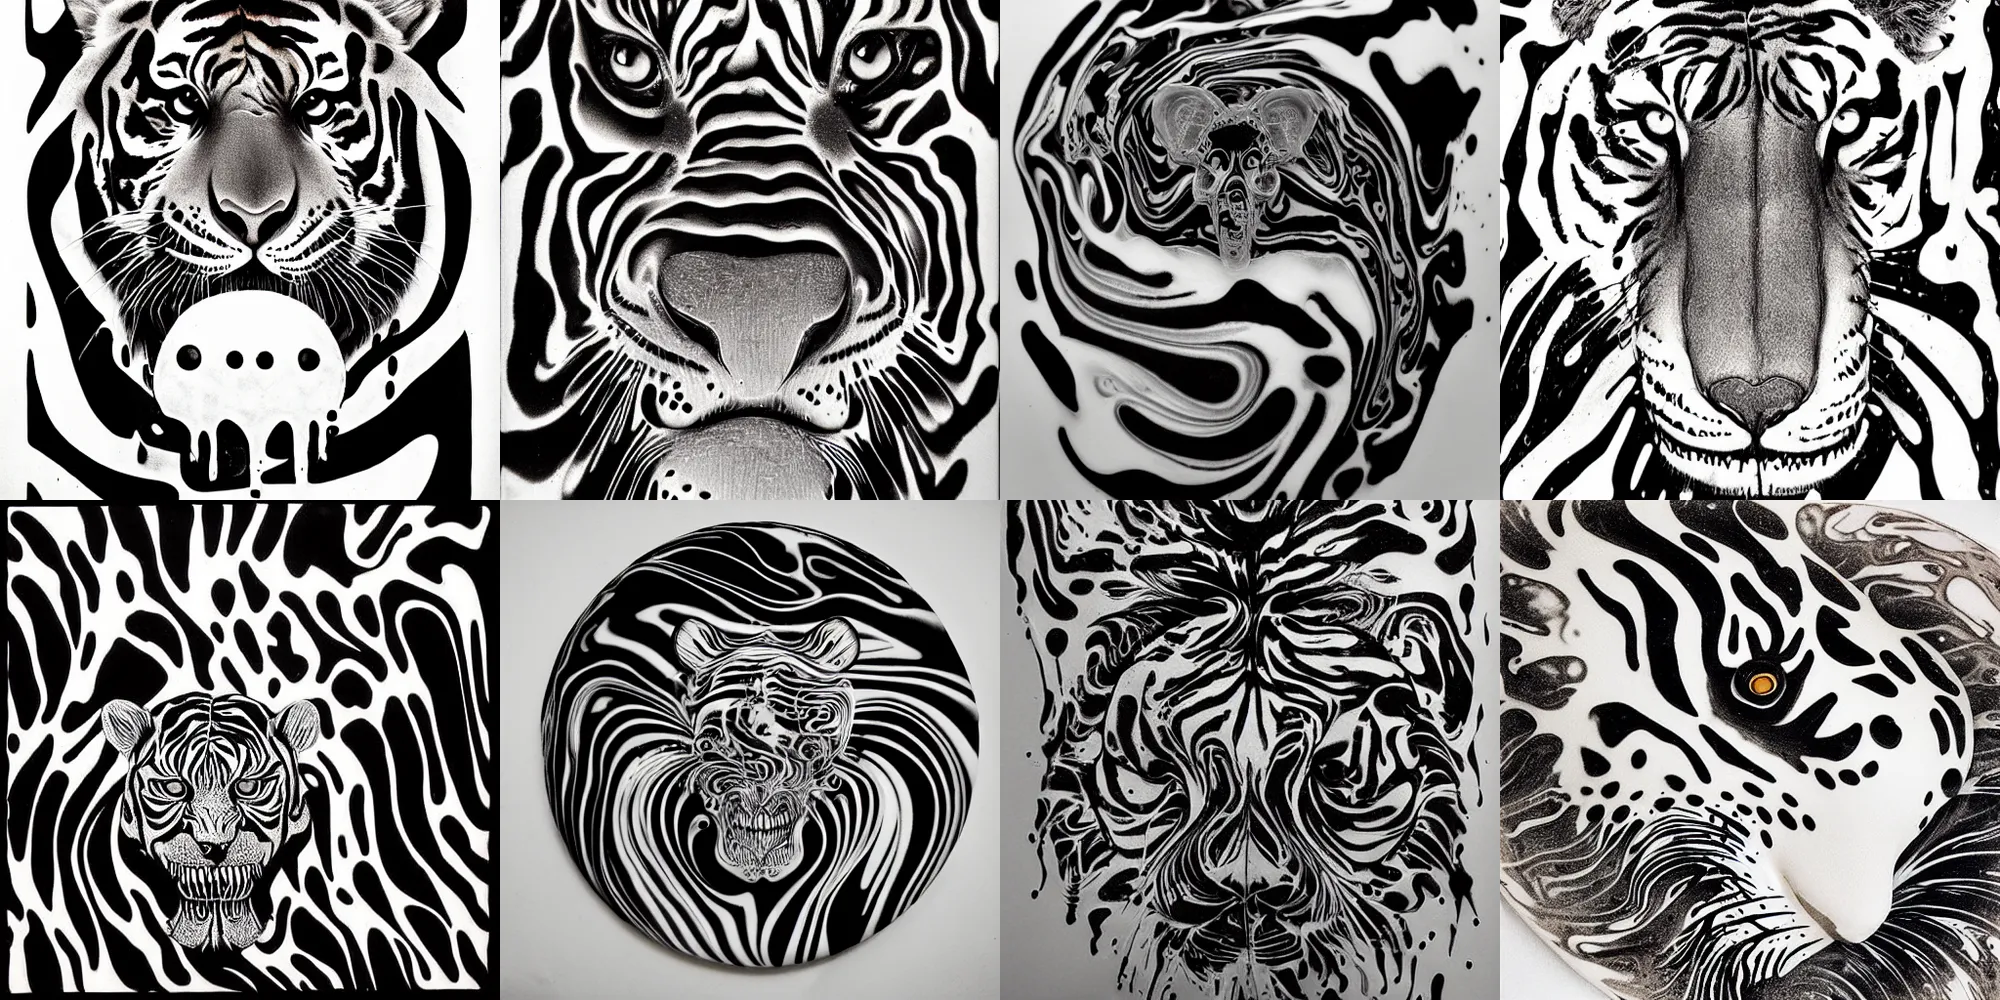 Prompt: latte art, reaction diffusion, water, abstract, liquid, swirly, black and white tiger head, skull, ink, latte art, by james jean